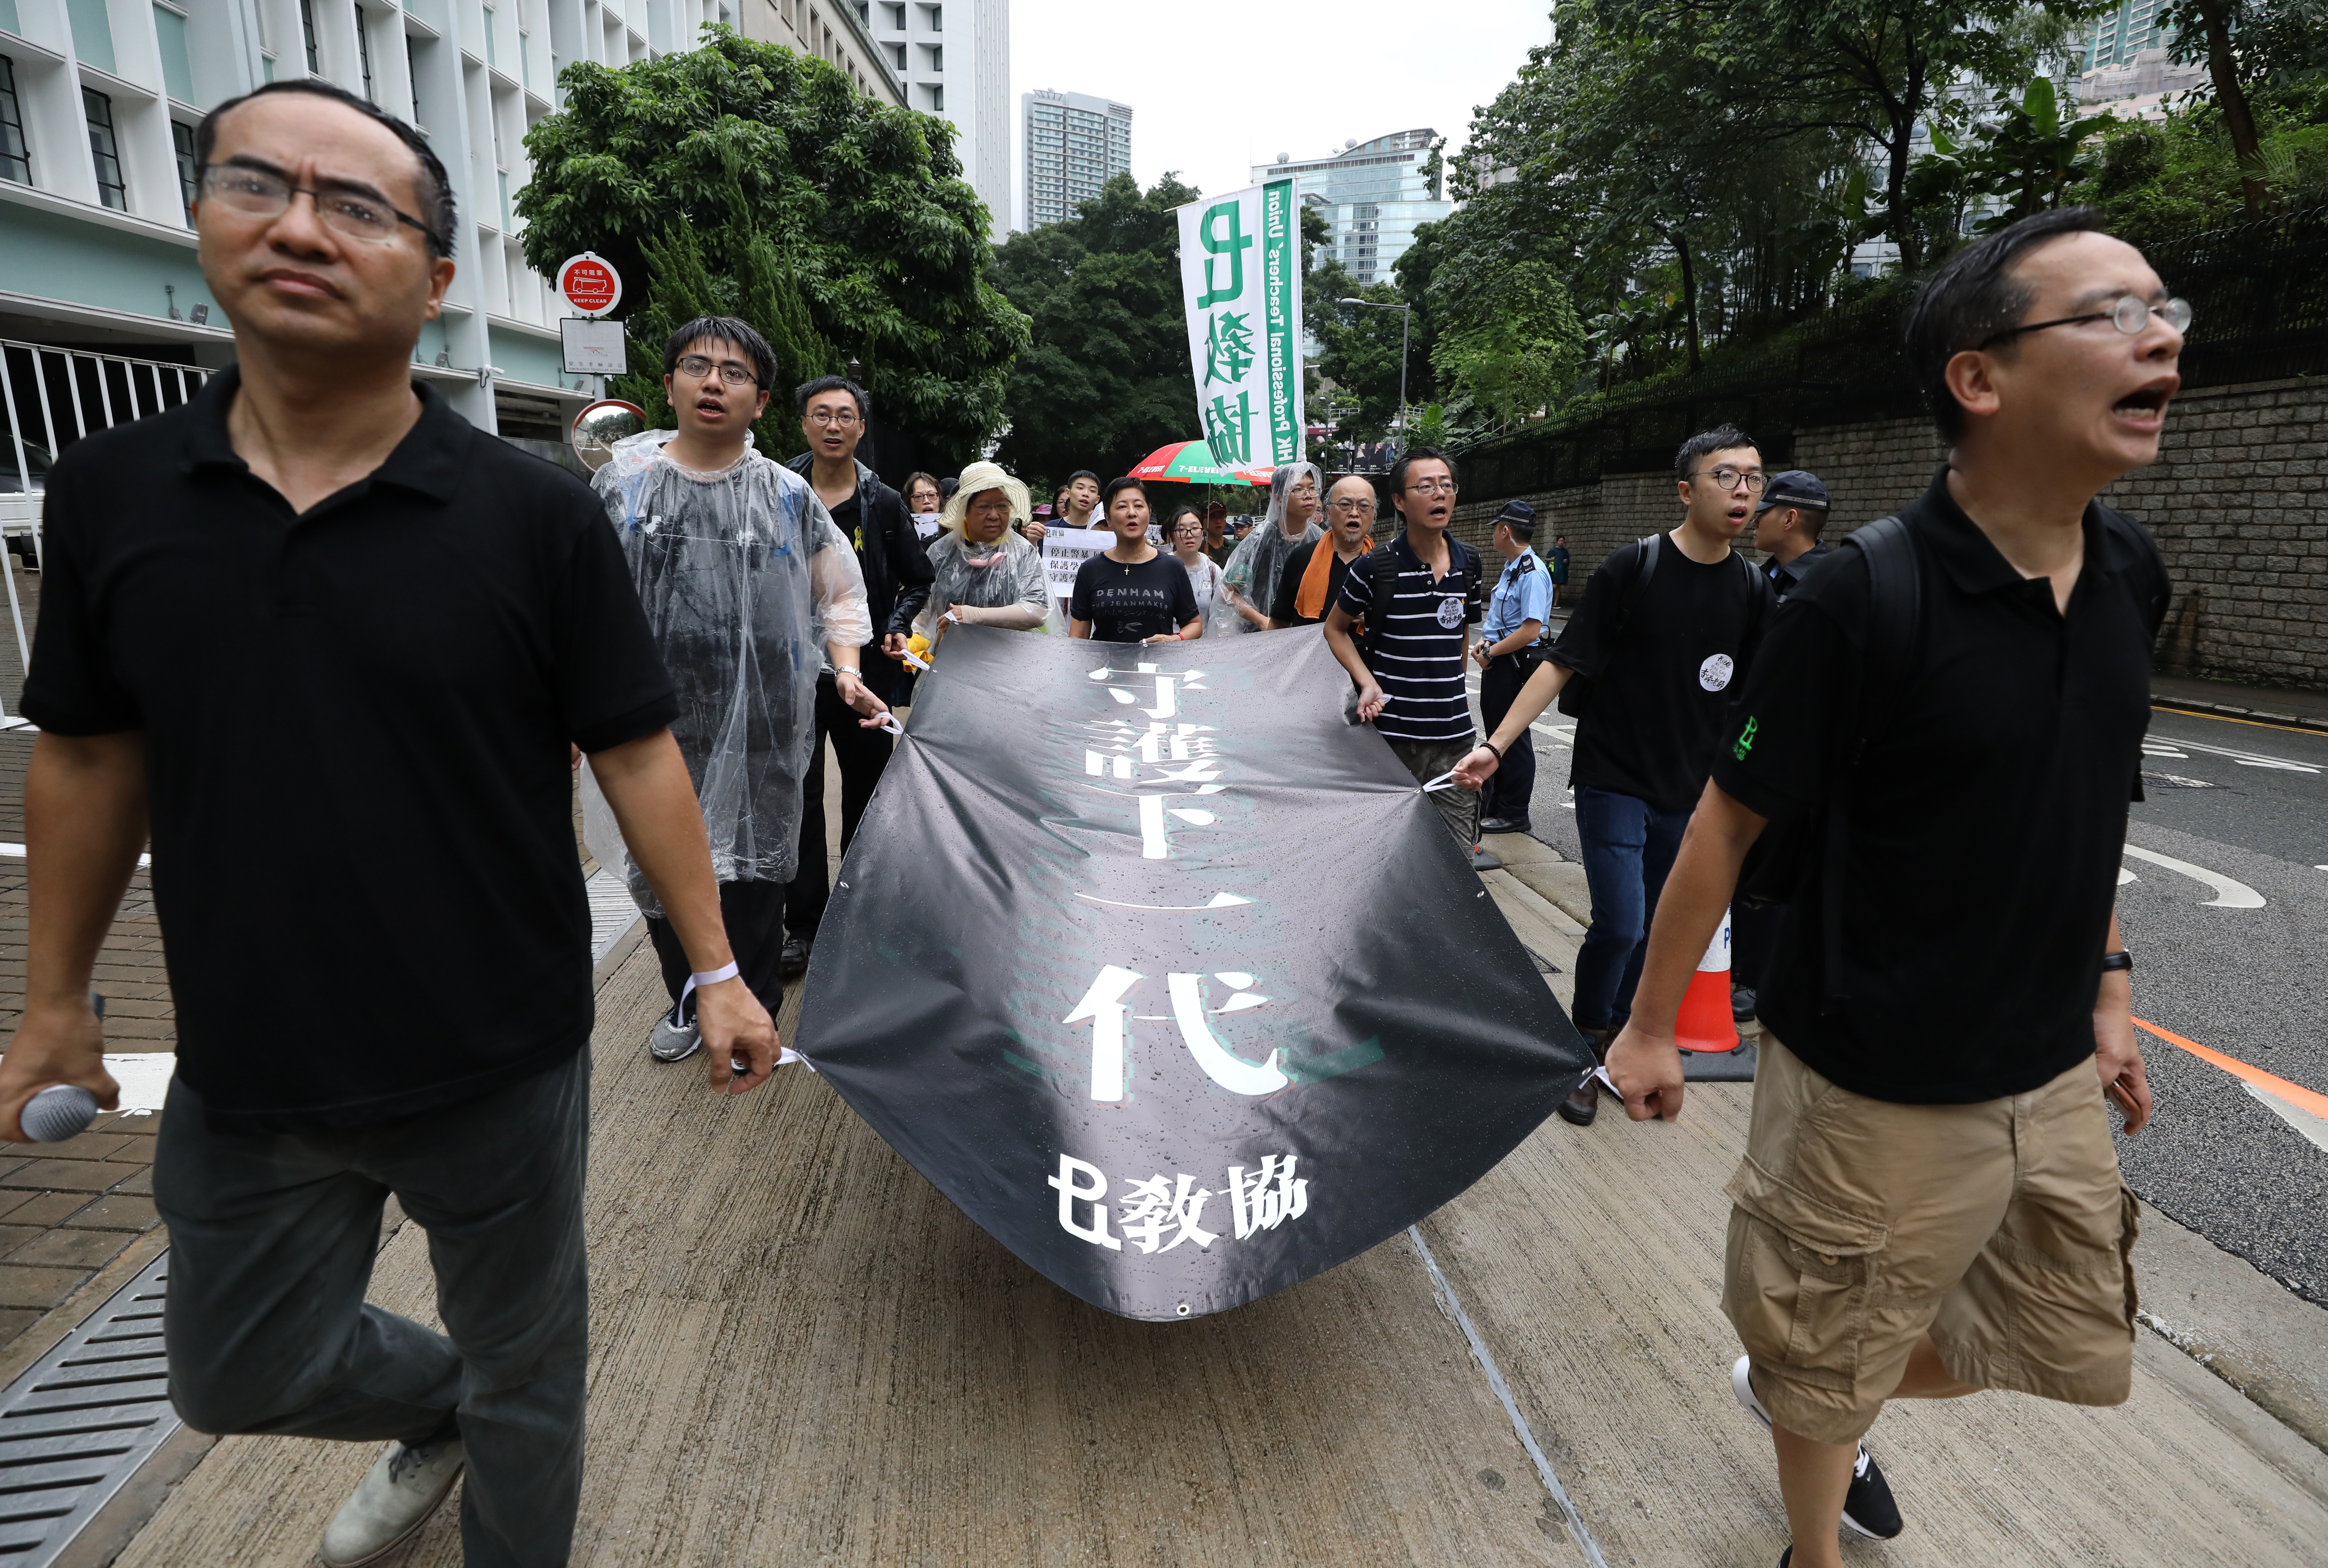 Hong Kong Professional Teachers' Union President Fung Wai-wah and Vice-President Ip Kin-yuen lead the teachers' rally for the withdrawl of the extradition bill in August 2019; Fung has asked the government to avoid interference into education.